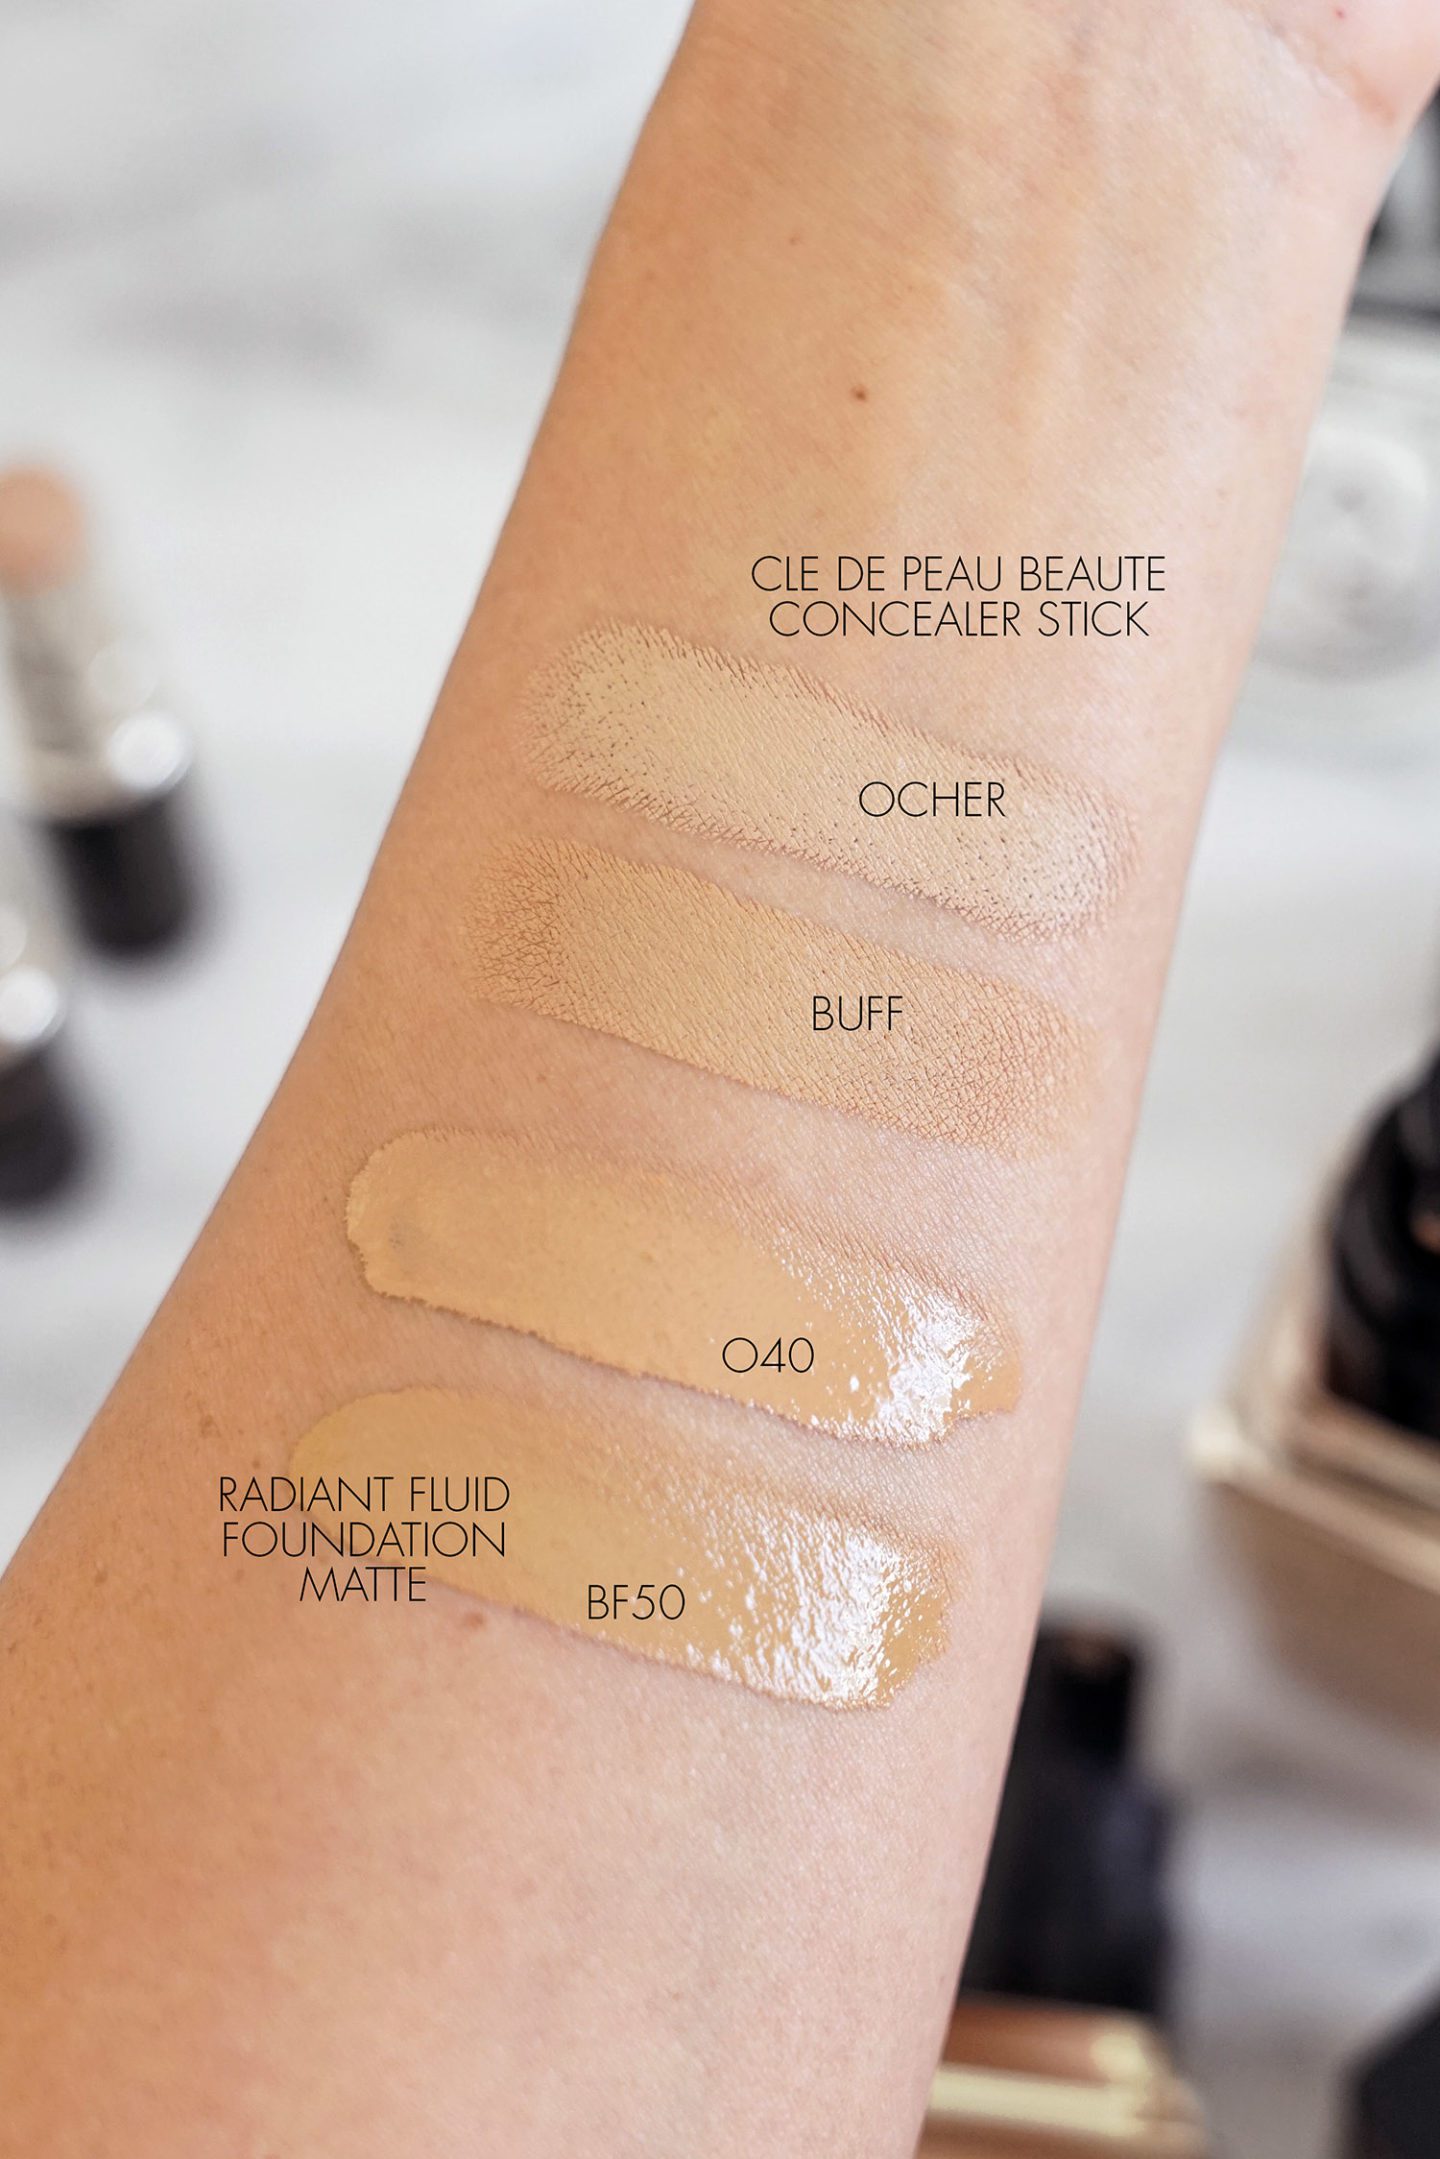 Cle de Peau Concealer Ocher and Buff, Radiant Fluid Foundation Matte in O40 and BF50